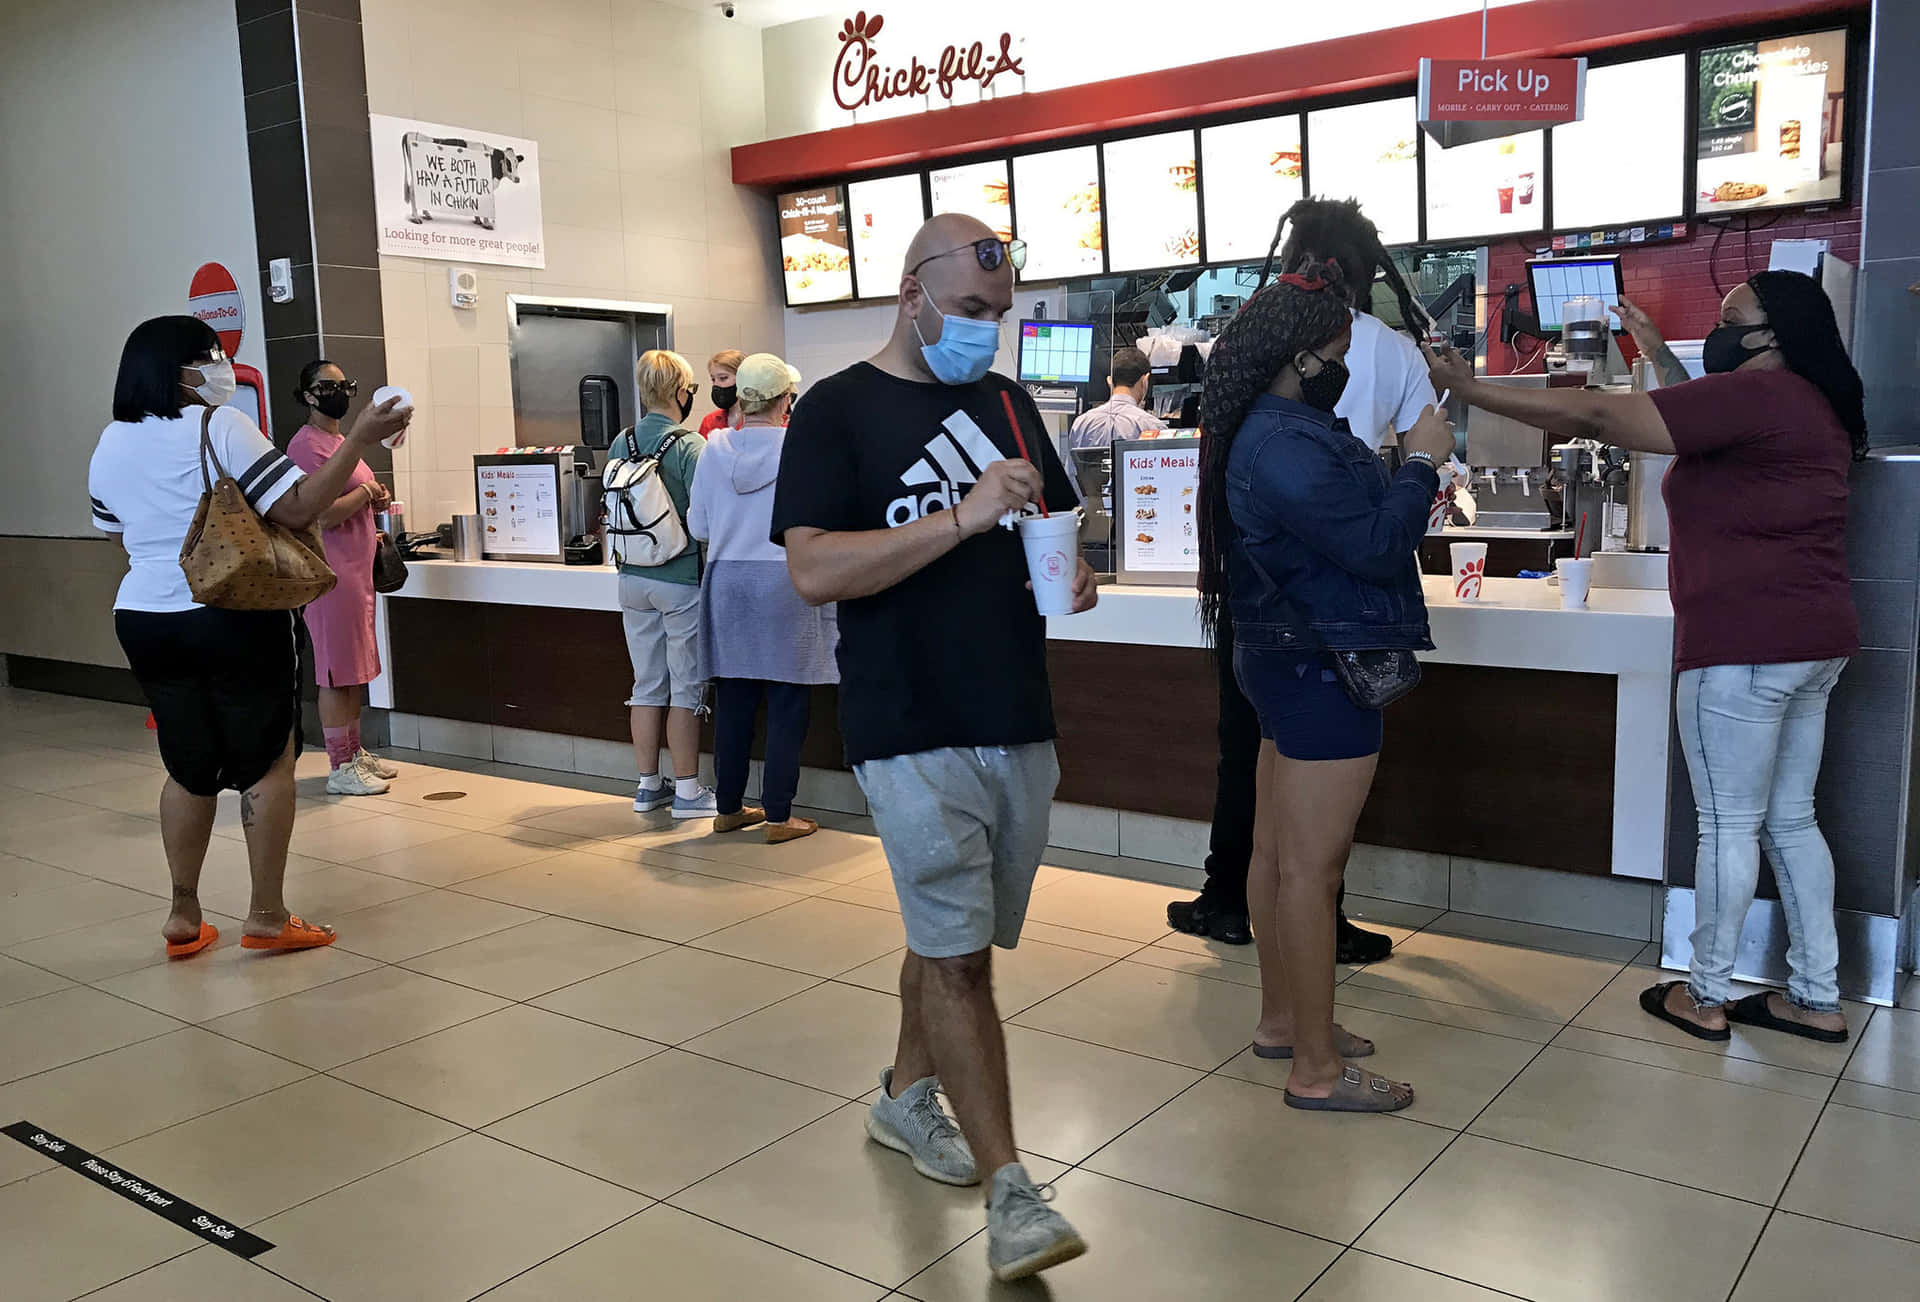 People Standing In Line At A Fast Food Restaurant